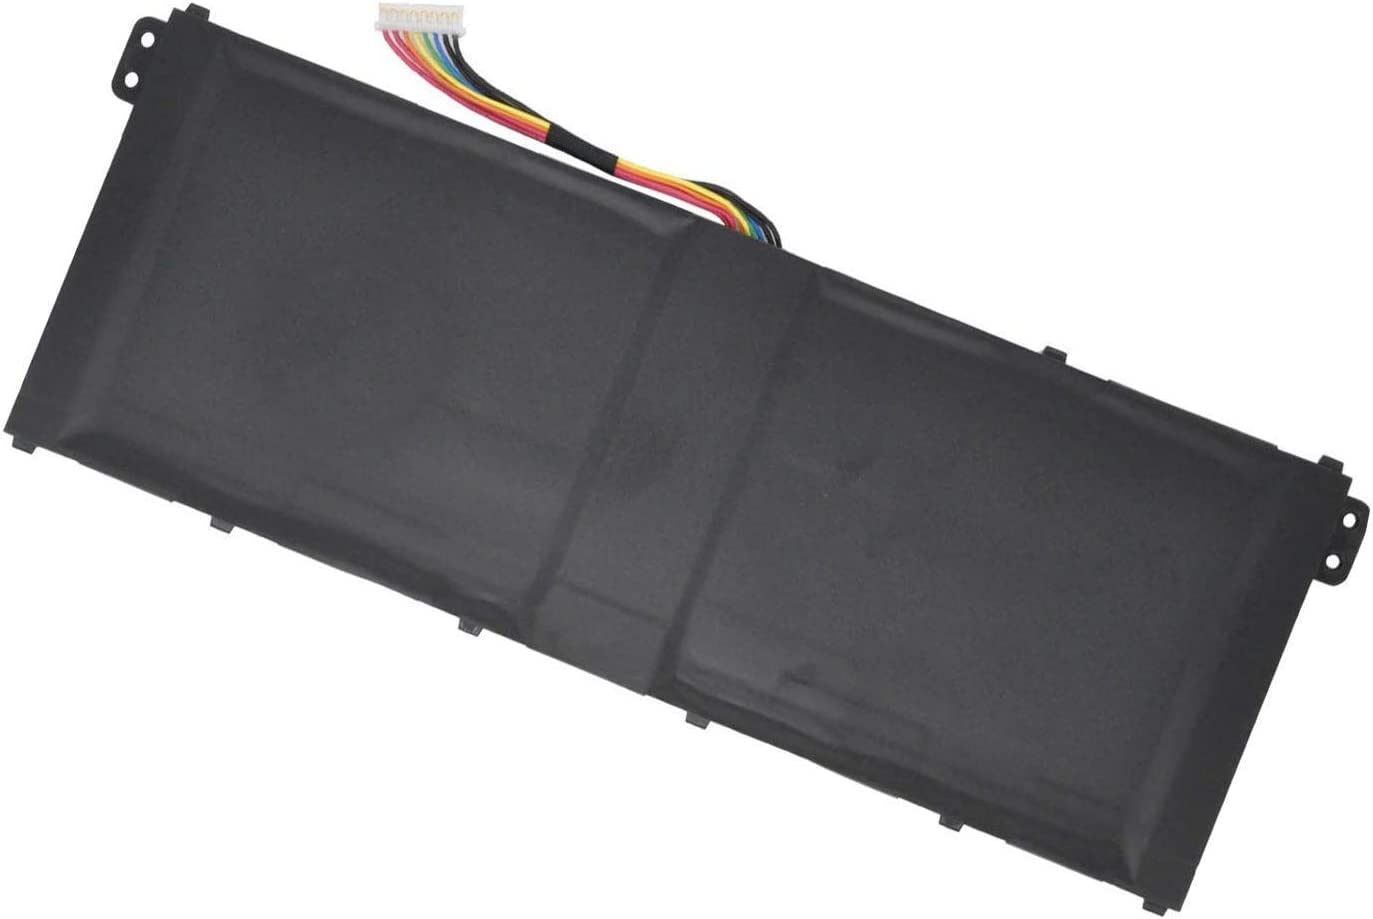 WISTAR AP16M5J Battery for Acer Aspire 1 3 5:A114-31 A114-31-C5GM A114-31-C4HH A114-31-C3E6 A515-51 ES1-523 A314-31 A315-21 A315-31 A315-51 A315-52 KT.00205.004 KT00205004